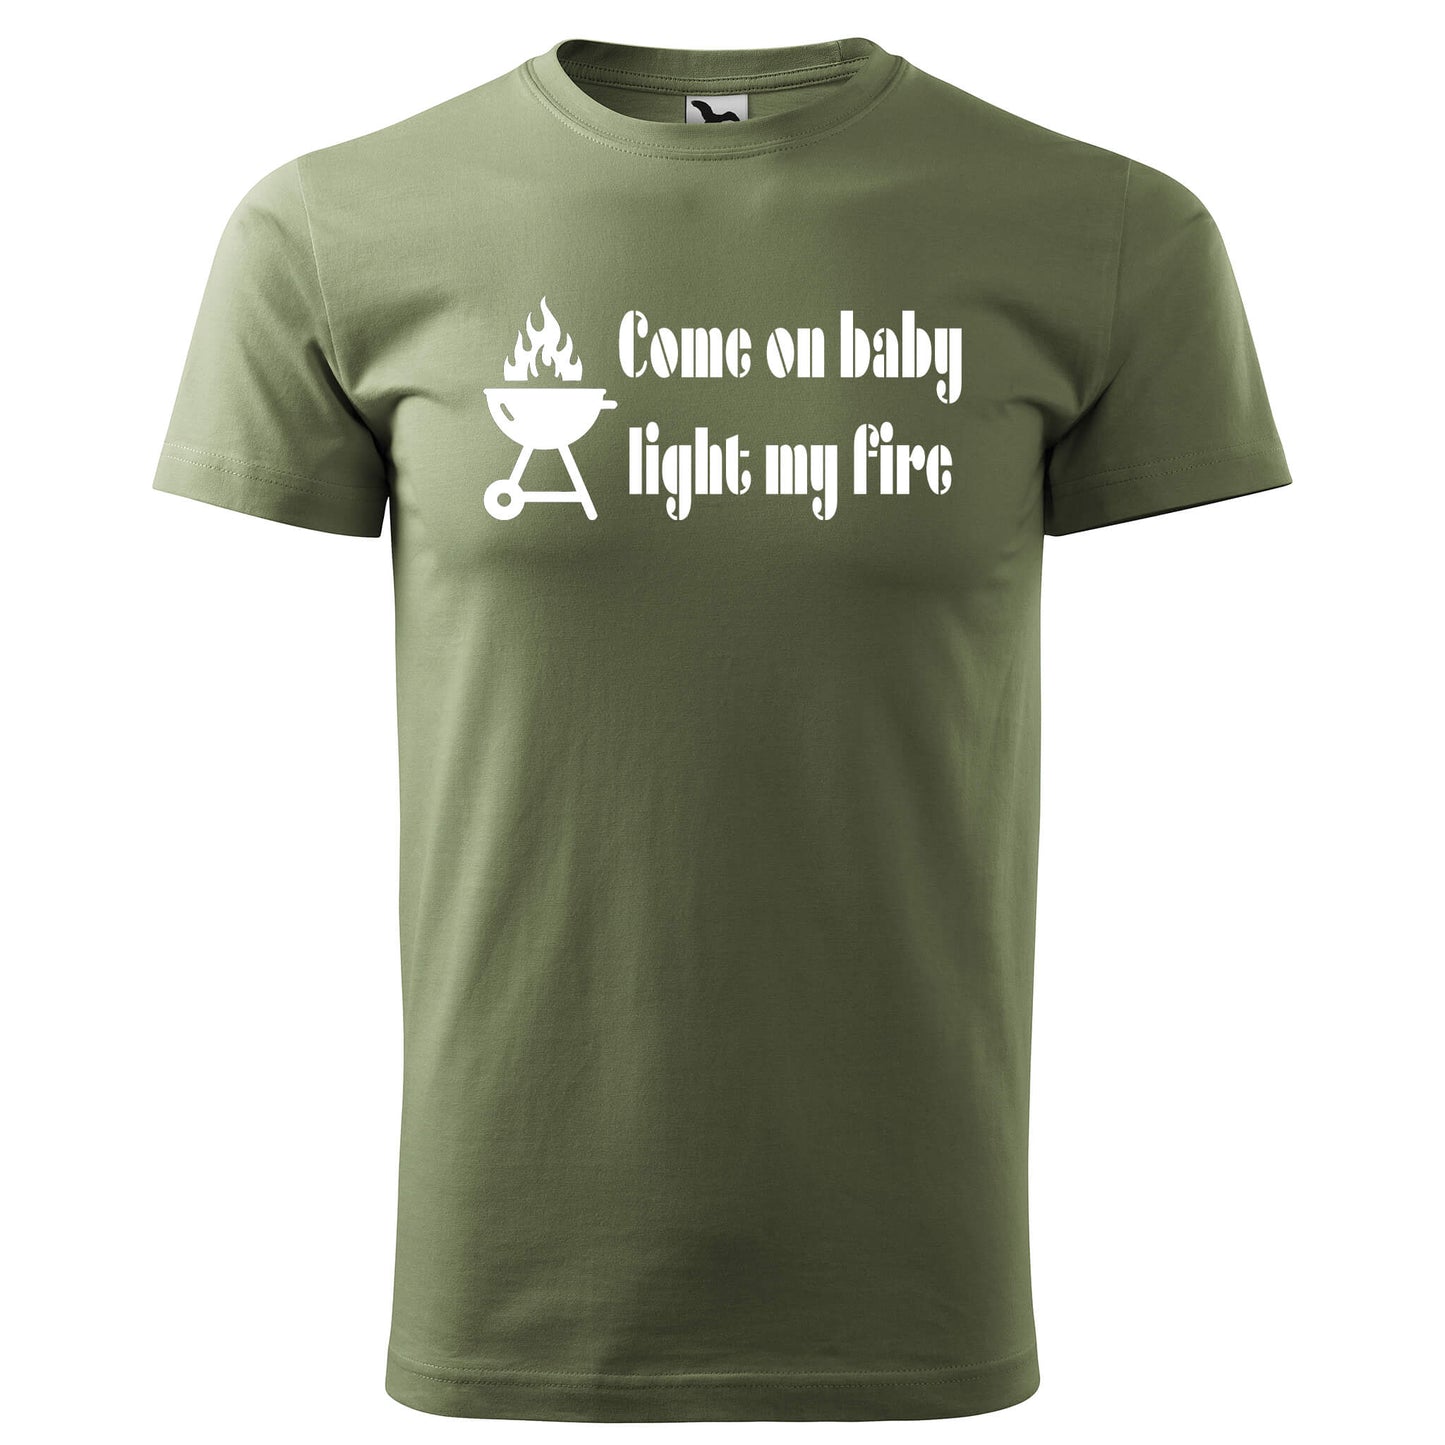 T-shirt - Come on baby light my fire - rvdesignprint